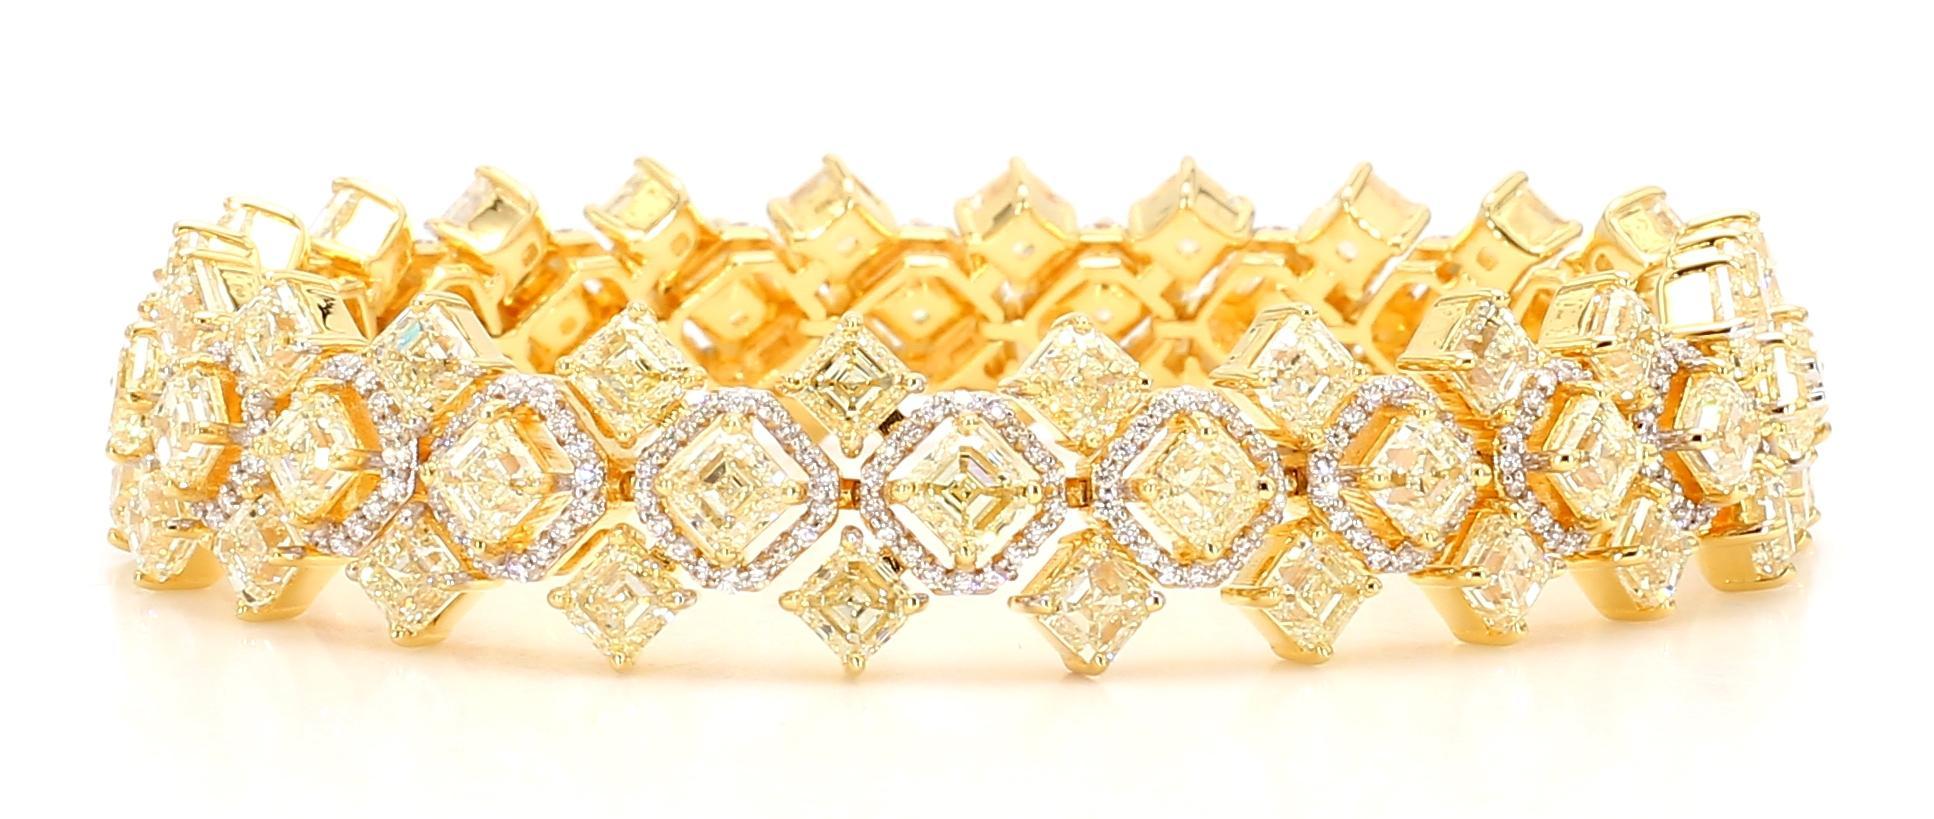 This exquisite Yellow Bracelet is a true masterpiece. It features a stunning Fancy Yellow Diamond weighing an astonishing 23.30 carats. The vibrant yellow hue of this diamond is captivating and elevates the beauty of the entire piece.

Surrounding